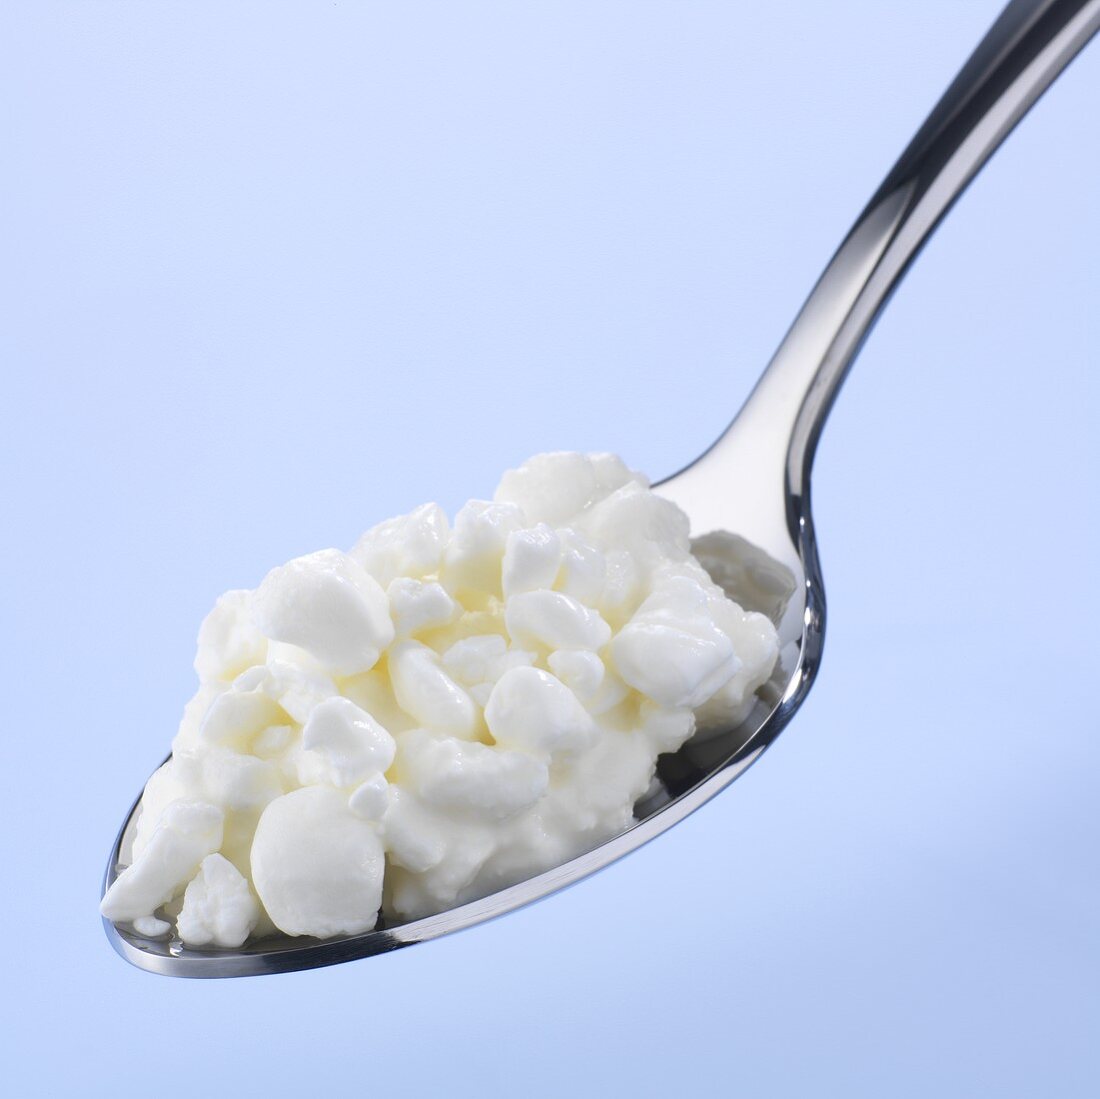 A spoonful of cottage cheese